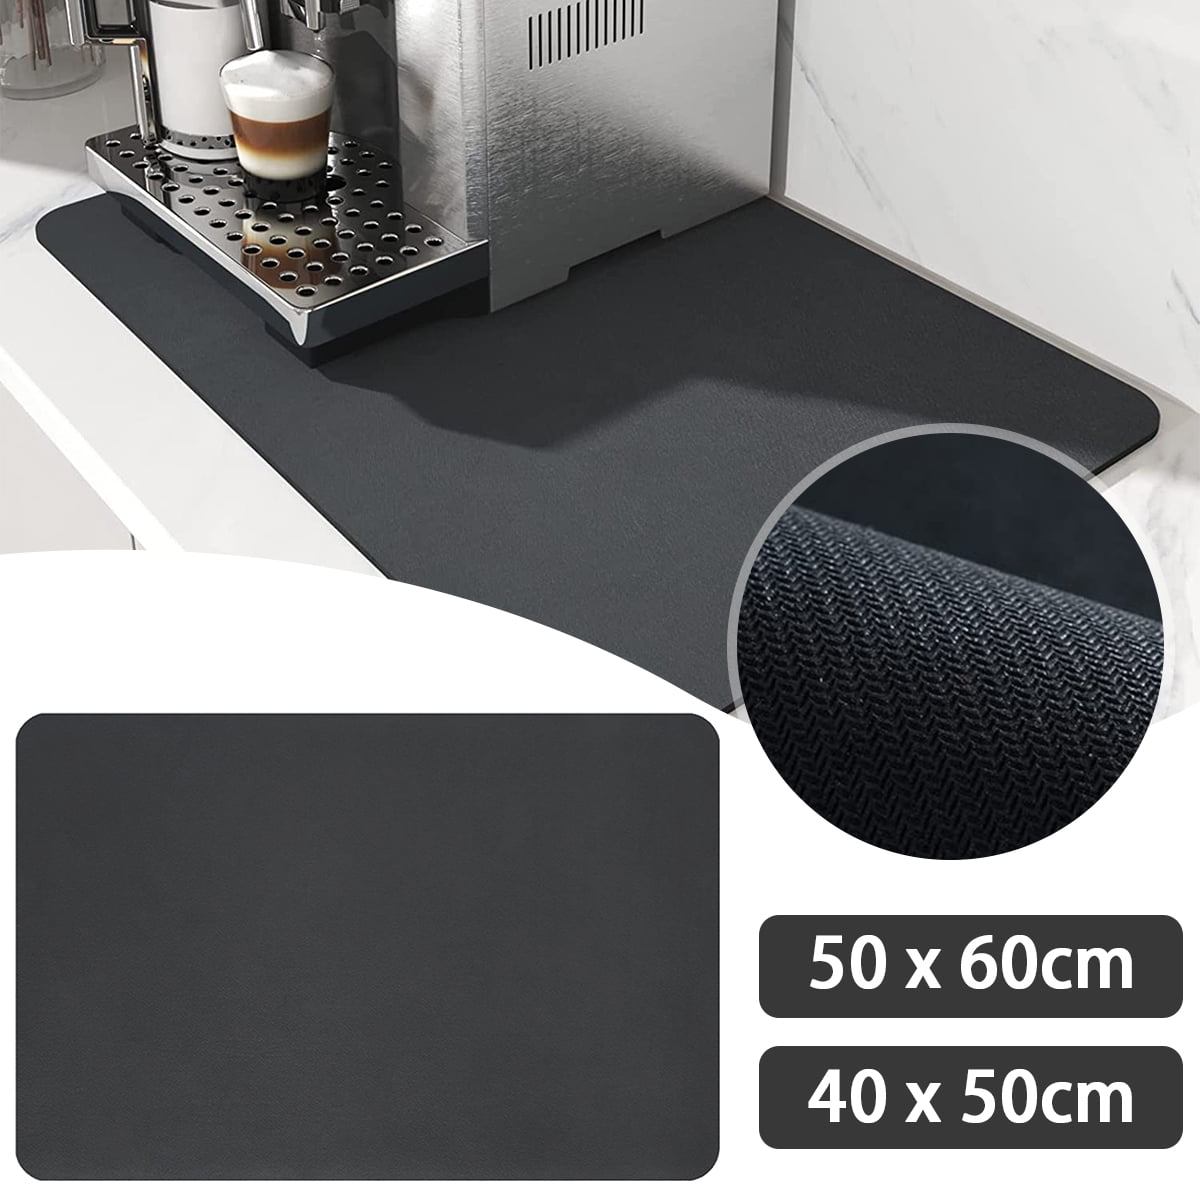 safarsa Coffee Bar Mat Accessories for Countertop Pioneer Flower Absorbent Hide Stain Rubber Backed Dish Drying Mats for Kitchen Counter Draining Pad Decor